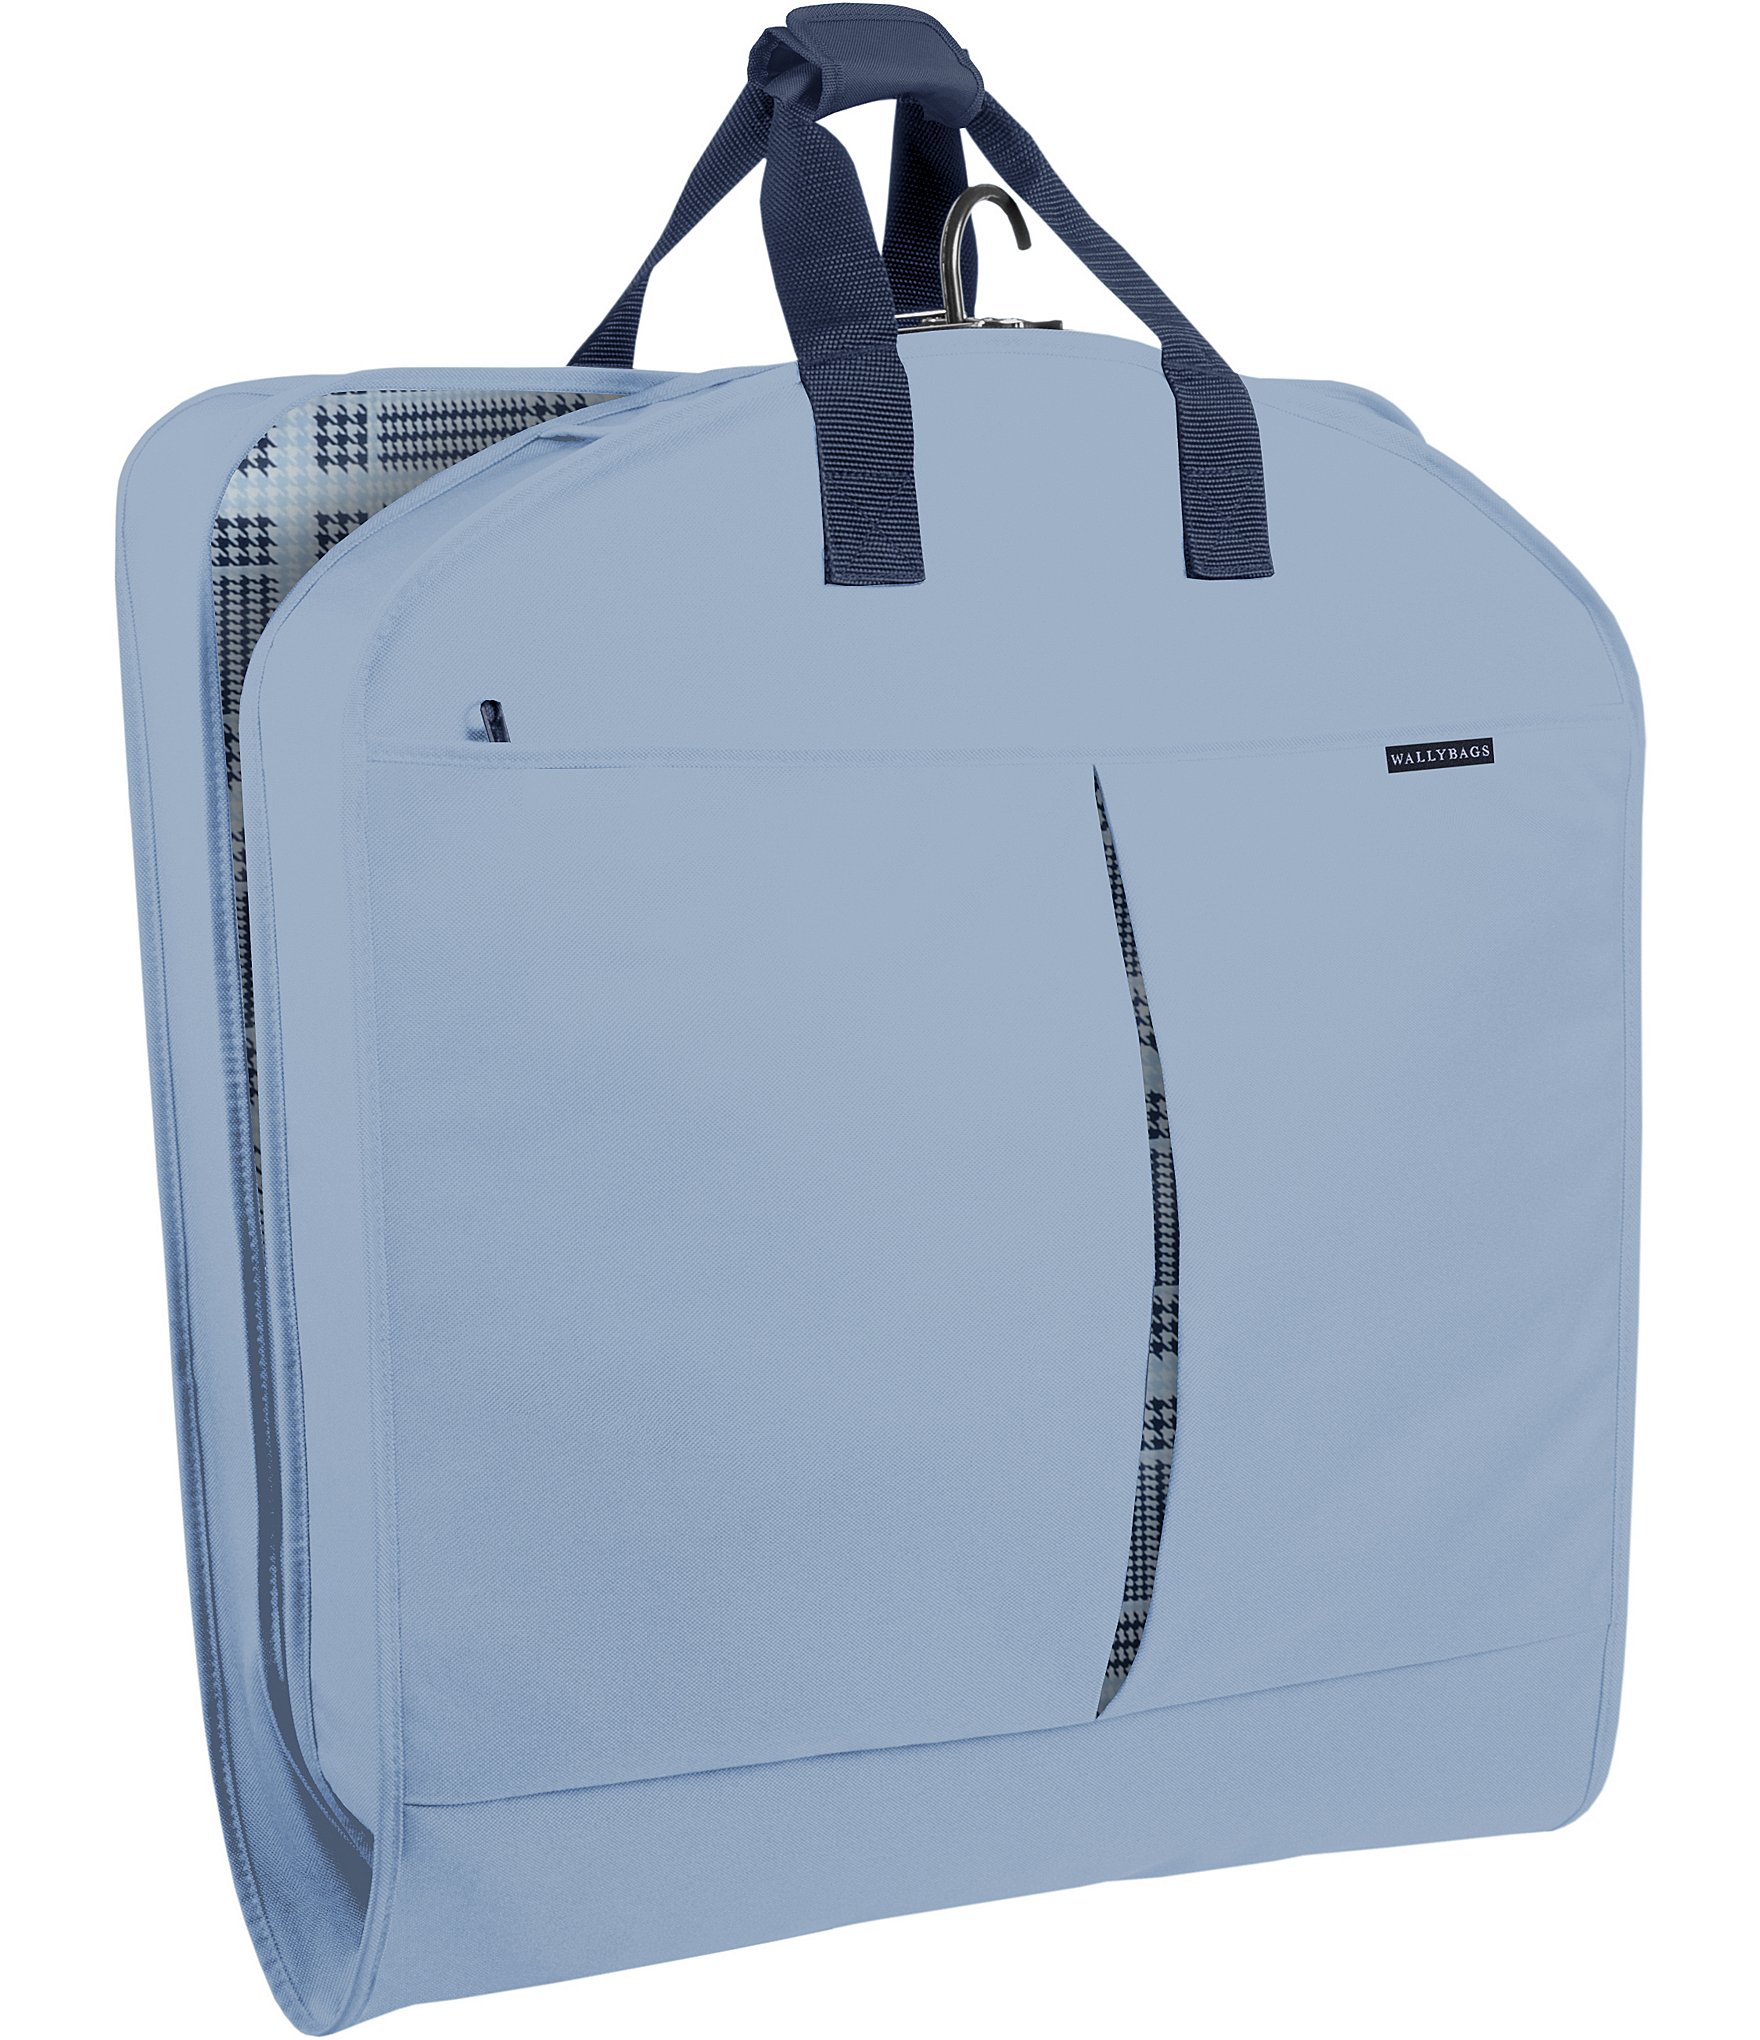 WallyBags | 52” Deluxe Travel Garment Bag with Two Pockets